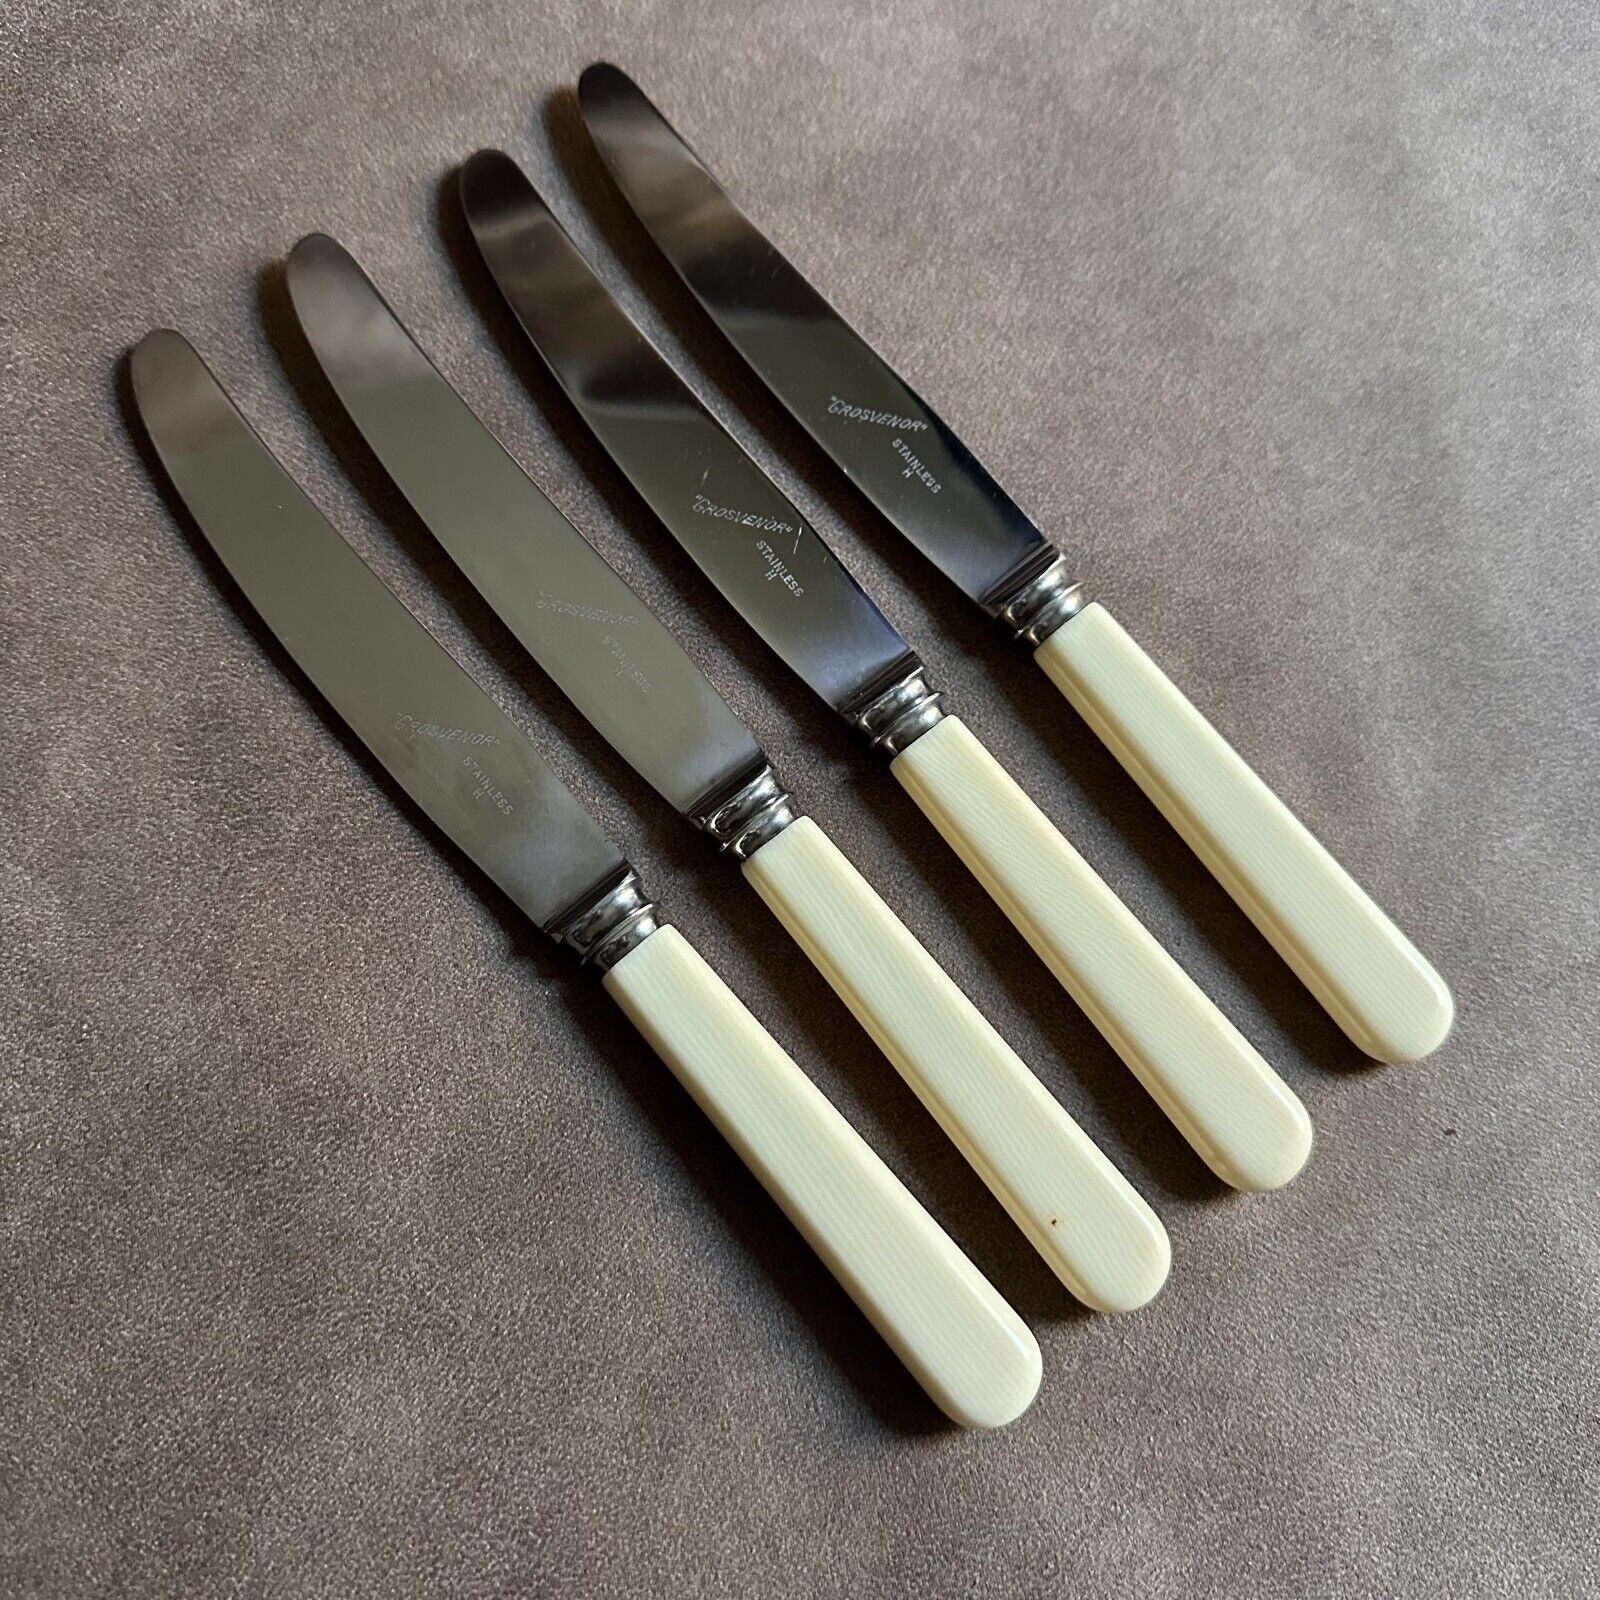 4x VINTAGE GROSVENOR ENGLAND FAUX BONE HANDLED STAINLESS BUTTER ENTREE KNIVES